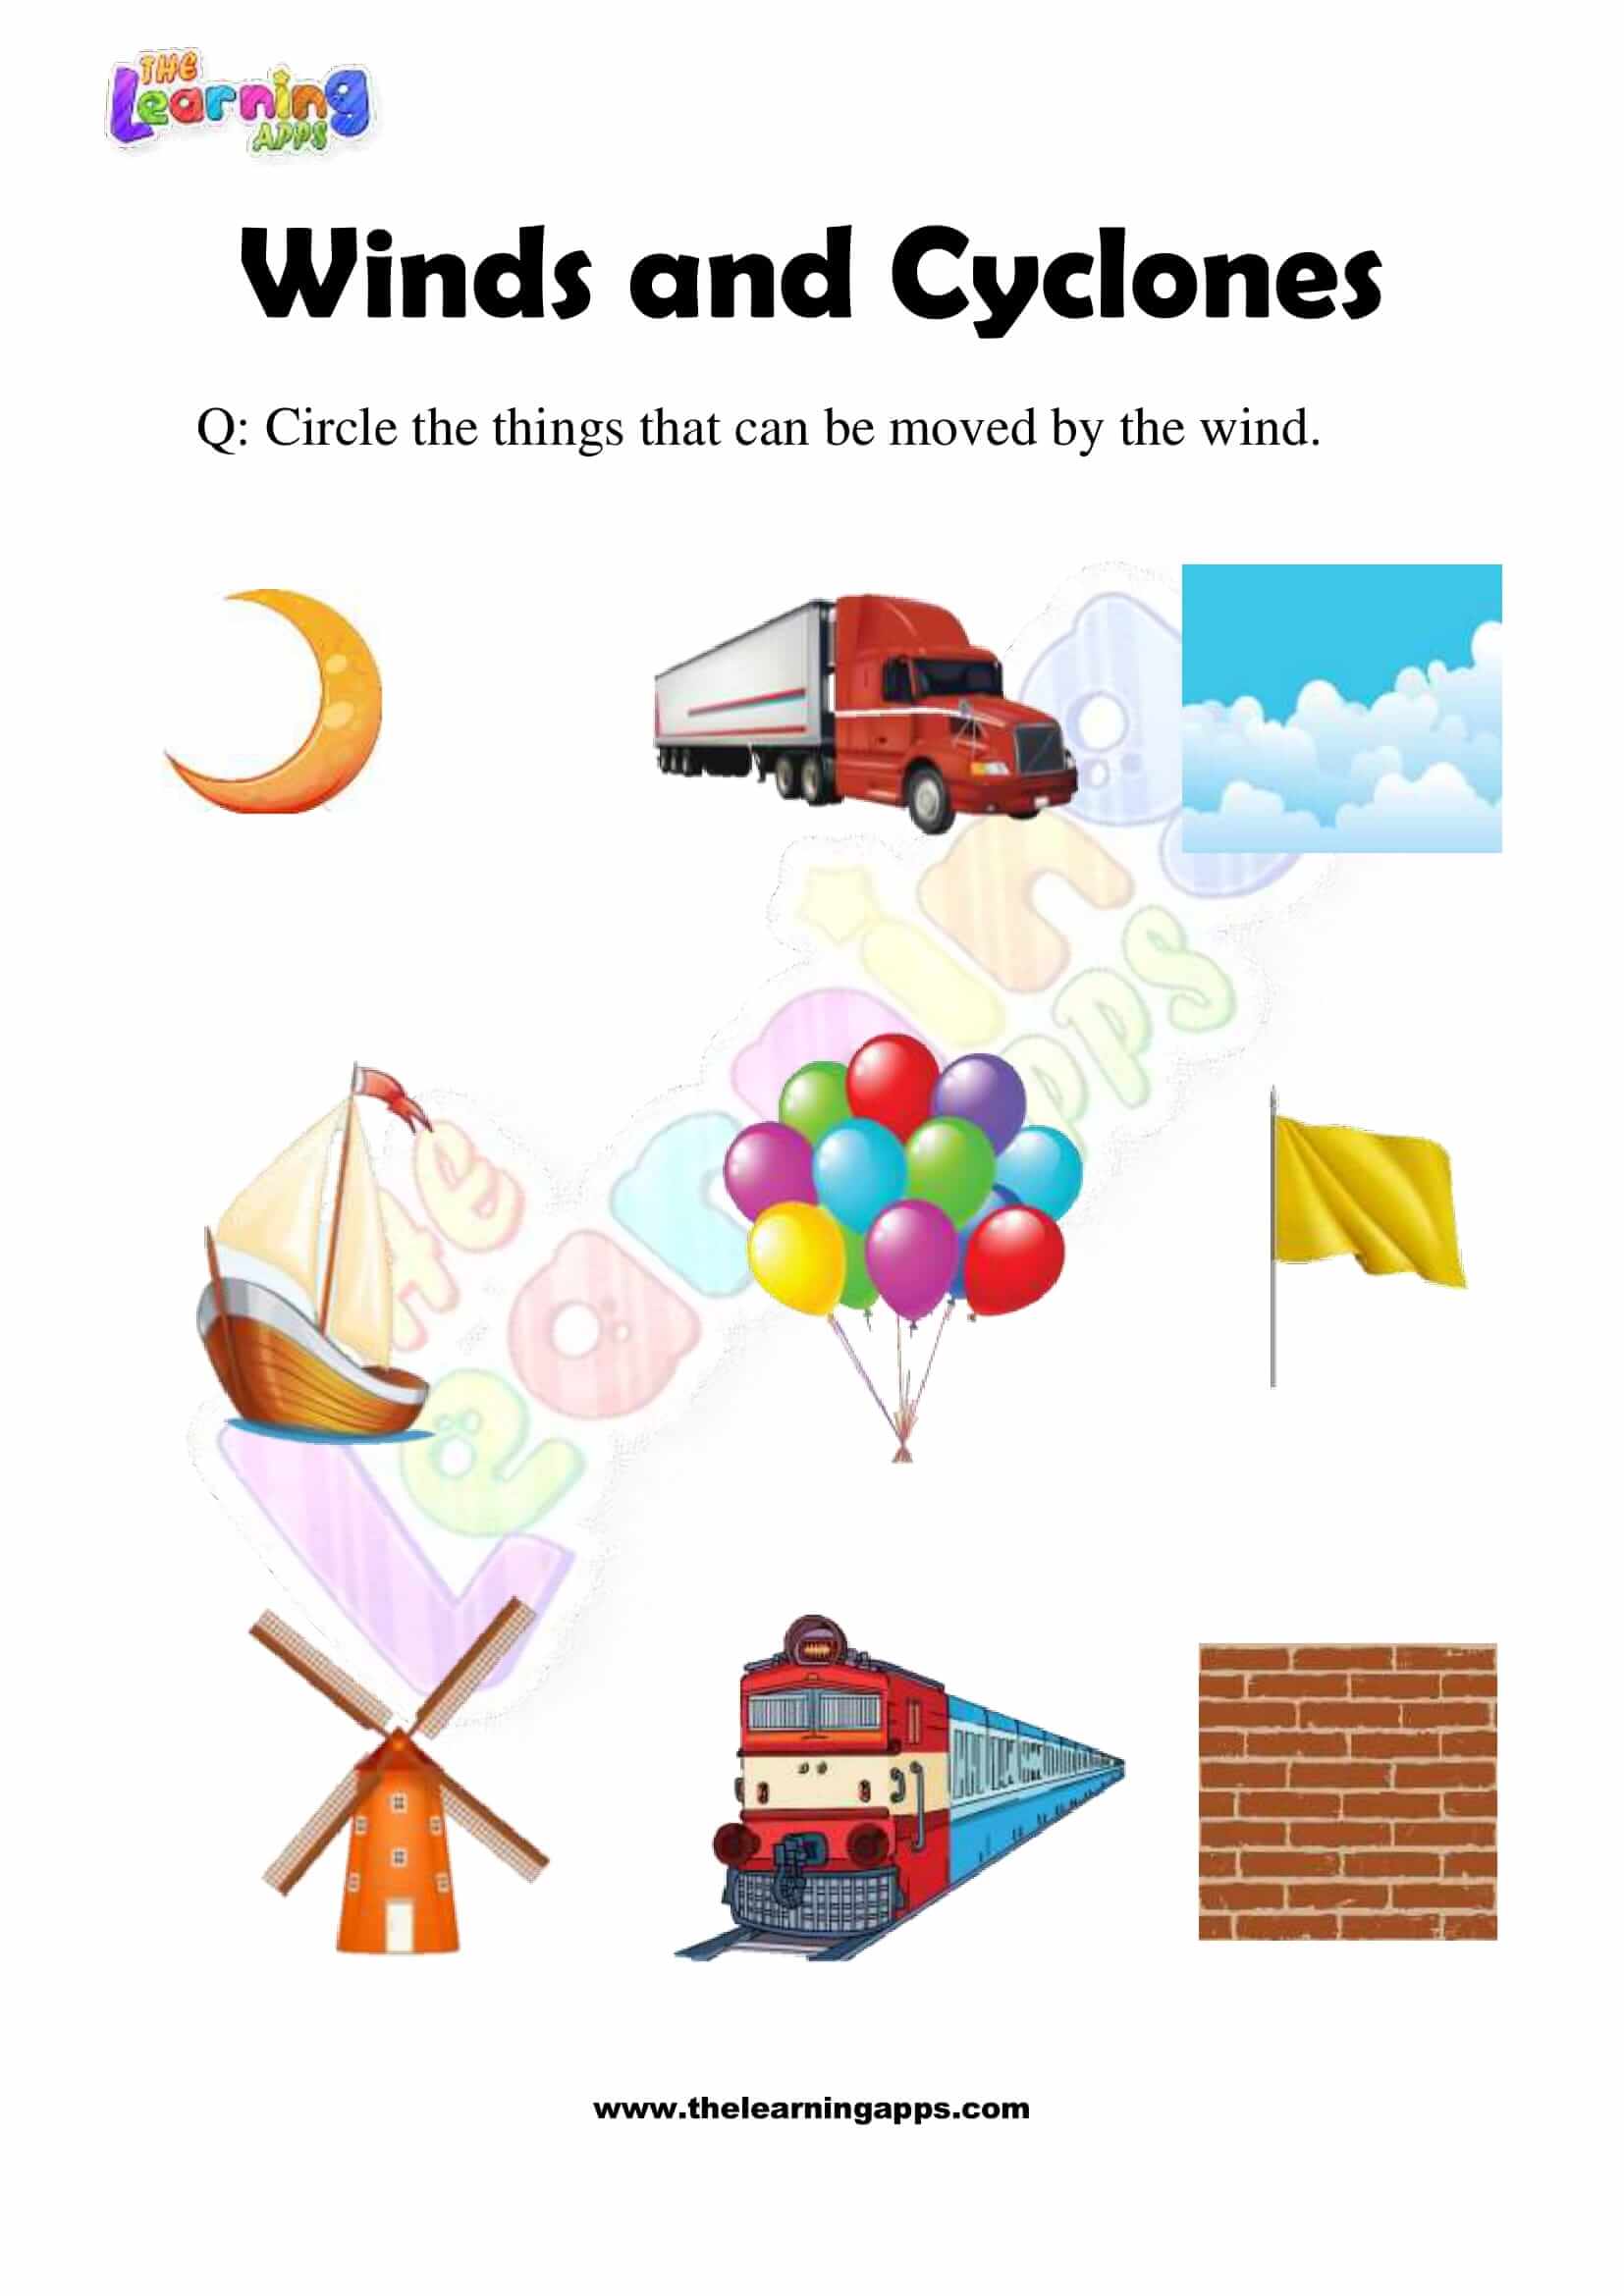 Winds and Cyclones - Grade 2 - Activity 1